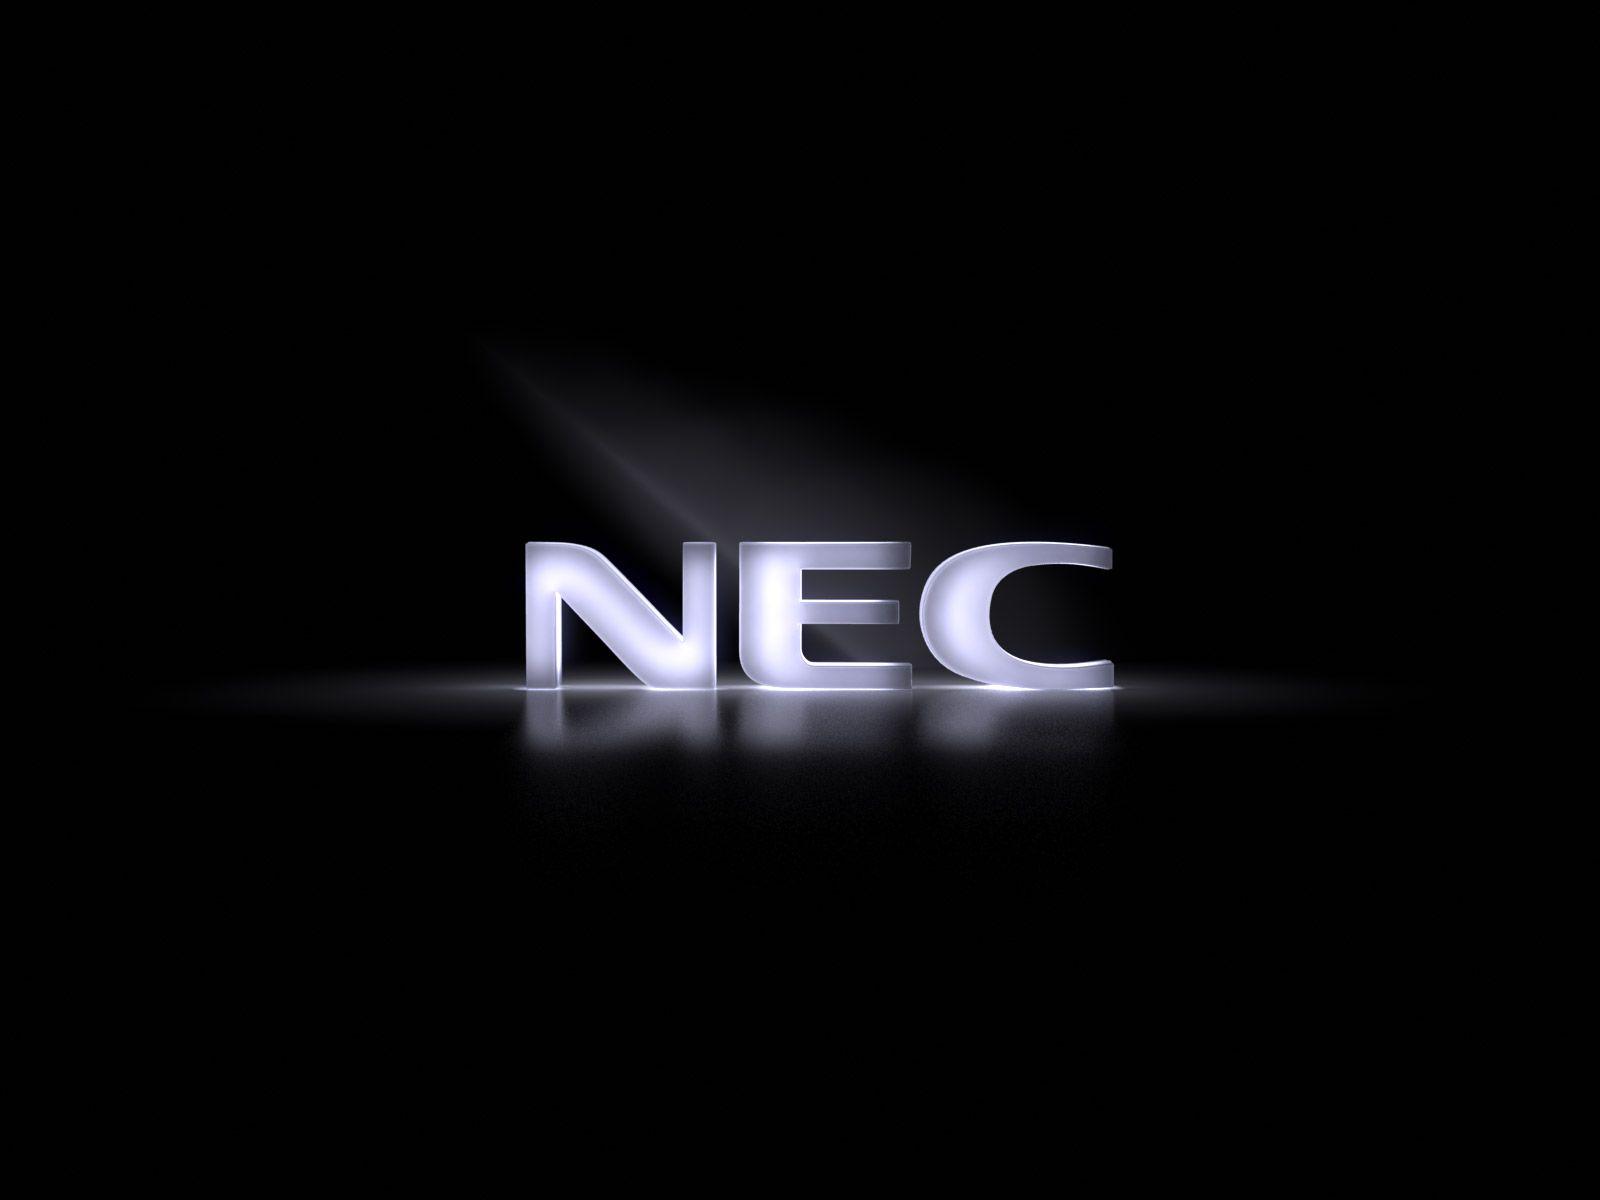 Nec Wallpapers Top Free Nec Backgrounds Wallpaperaccess